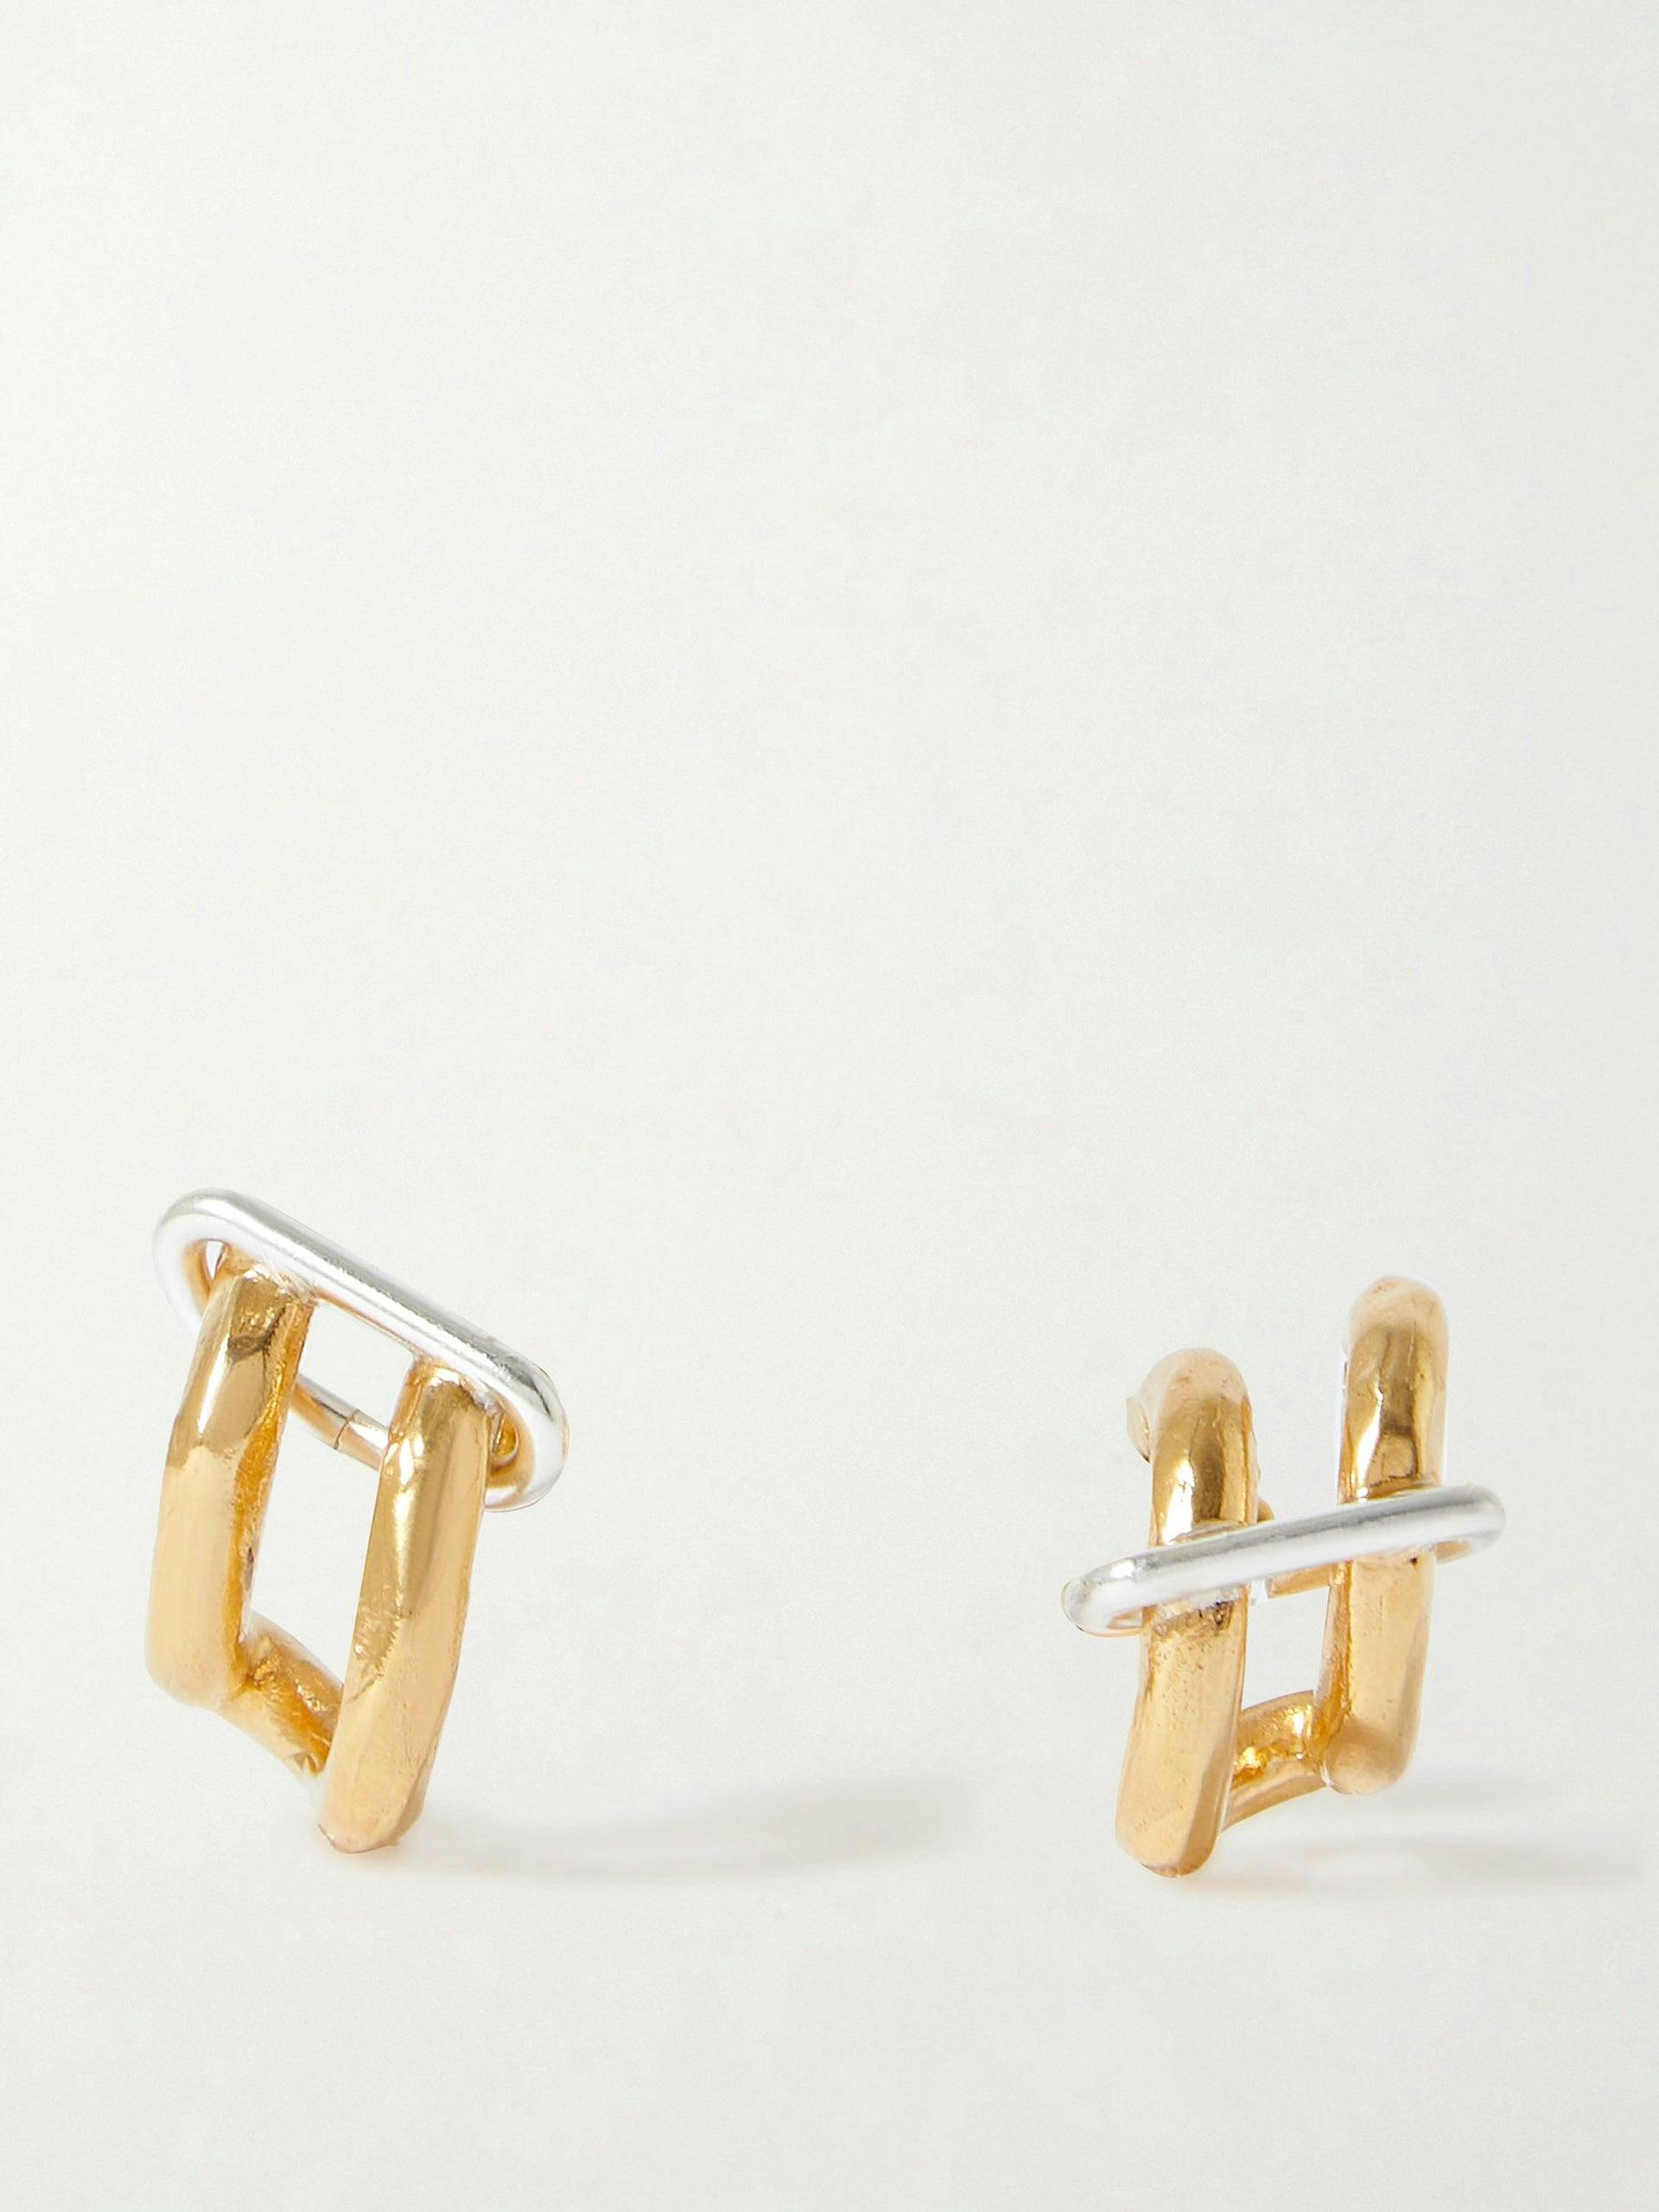 Recycled silver and gold-plated earrings